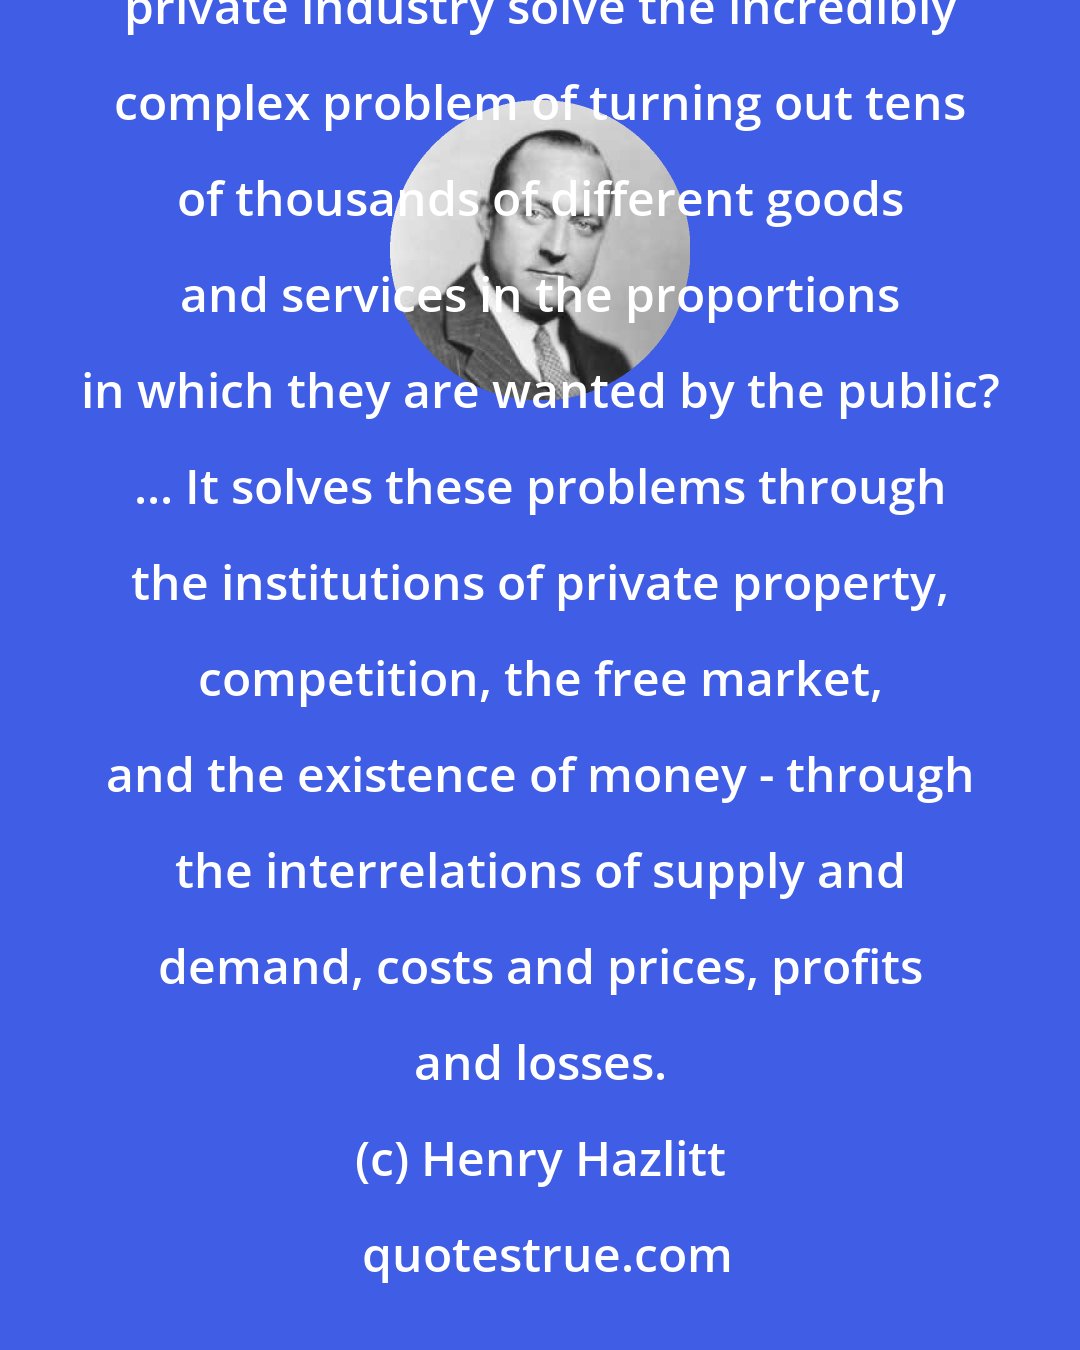 Henry Hazlitt: We are so accustomed to the miracle of private enterprise that we habitually take it for granted. But how does private industry solve the incredibly complex problem of turning out tens of thousands of different goods and services in the proportions in which they are wanted by the public? ... It solves these problems through the institutions of private property, competition, the free market, and the existence of money - through the interrelations of supply and demand, costs and prices, profits and losses.